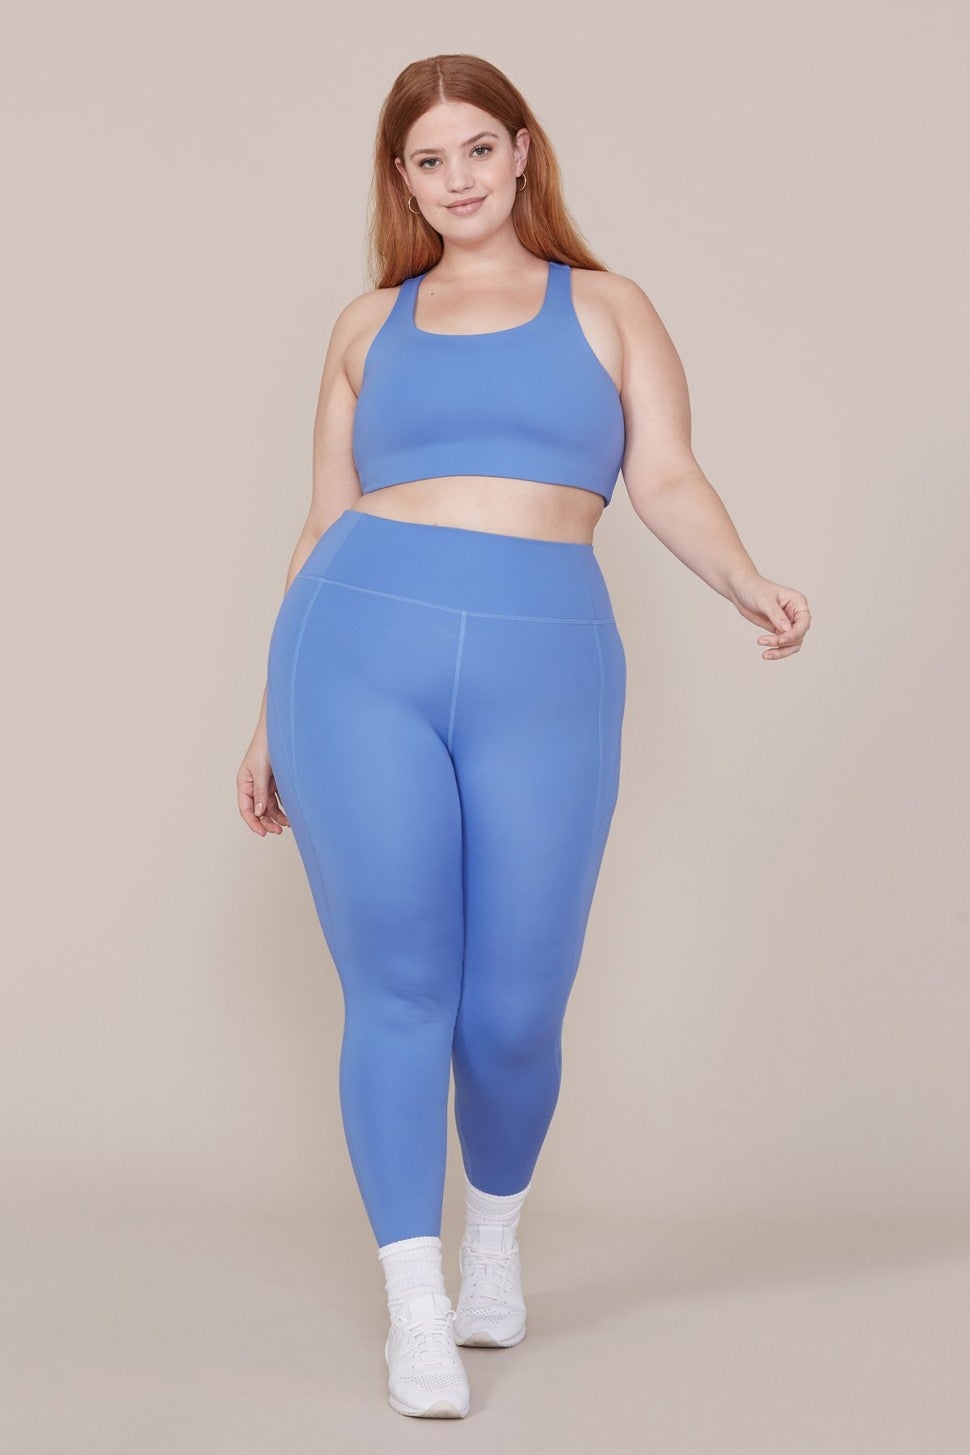 Girlfriend Collective periwinkle blue bra and legging